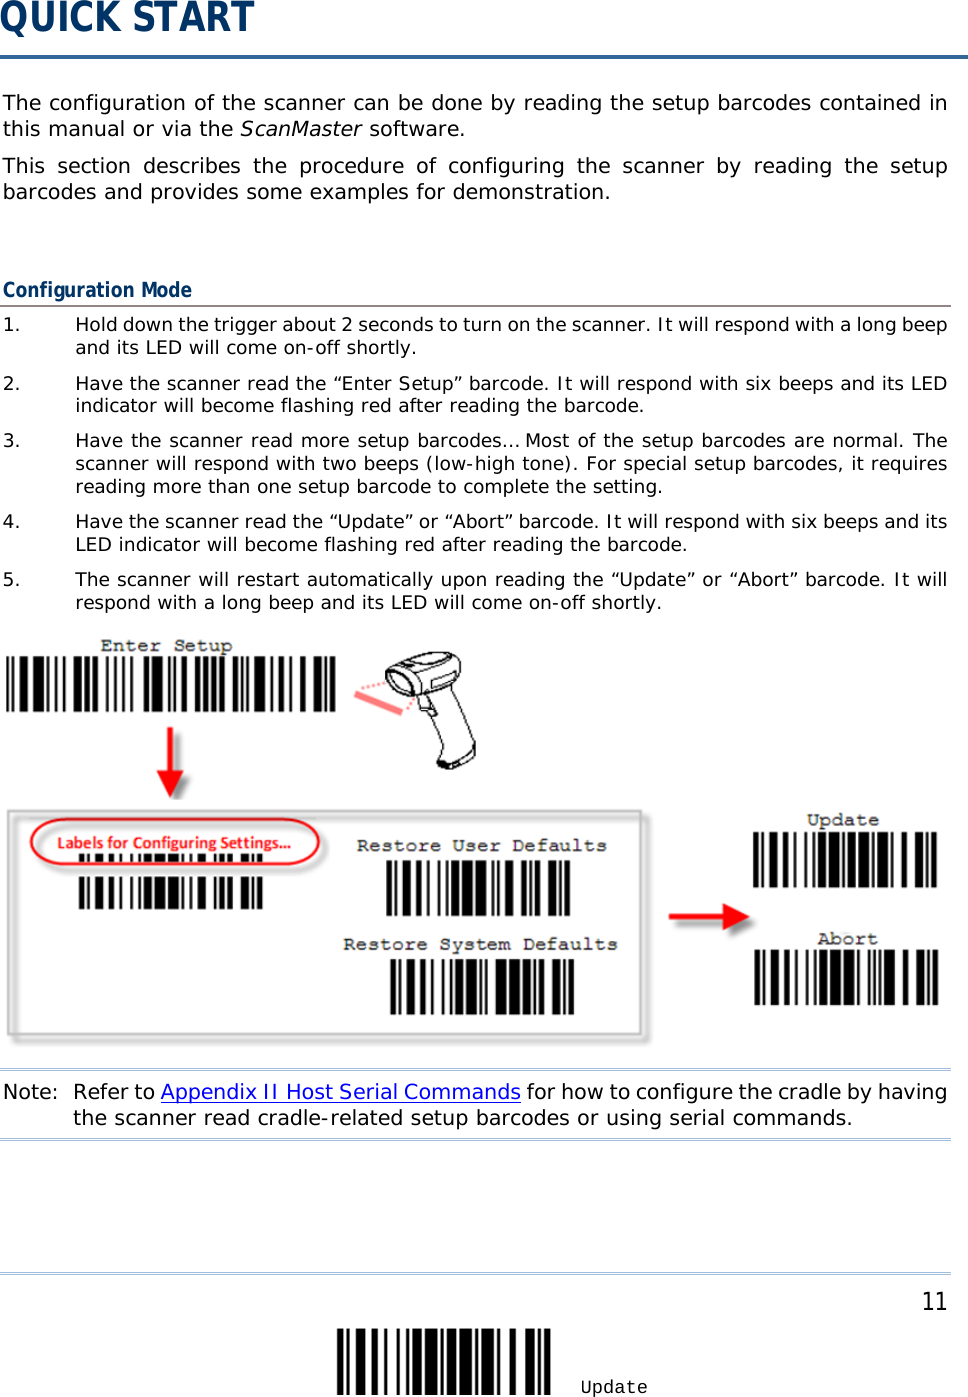  The configuration of the scanner can be done by reading the setup barcodes contained in this manual or via the ScanMaster software.  This section describes the procedure of configuring the scanner by reading the setup barcodes and provides some examples for demonstration.  Configuration Mode 1. Hold down the trigger about 2 seconds to turn on the scanner. It will respond with a long beep and its LED will come on-off shortly. 2. Have the scanner read the “Enter Setup” barcode. It will respond with six beeps and its LED indicator will become flashing red after reading the barcode. 3. Have the scanner read more setup barcodes… Most of the setup barcodes are normal. The scanner will respond with two beeps (low-high tone). For special setup barcodes, it requires reading more than one setup barcode to complete the setting. 4. Have the scanner read the “Update” or “Abort” barcode. It will respond with six beeps and its LED indicator will become flashing red after reading the barcode. 5. The scanner will restart automatically upon reading the “Update” or “Abort” barcode. It will respond with a long beep and its LED will come on-off shortly.  Note: Refer to Appendix II Host Serial Commands for how to configure the cradle by having the scanner read cradle-related setup barcodes or using serial commands.  QUICK START     11 Update 